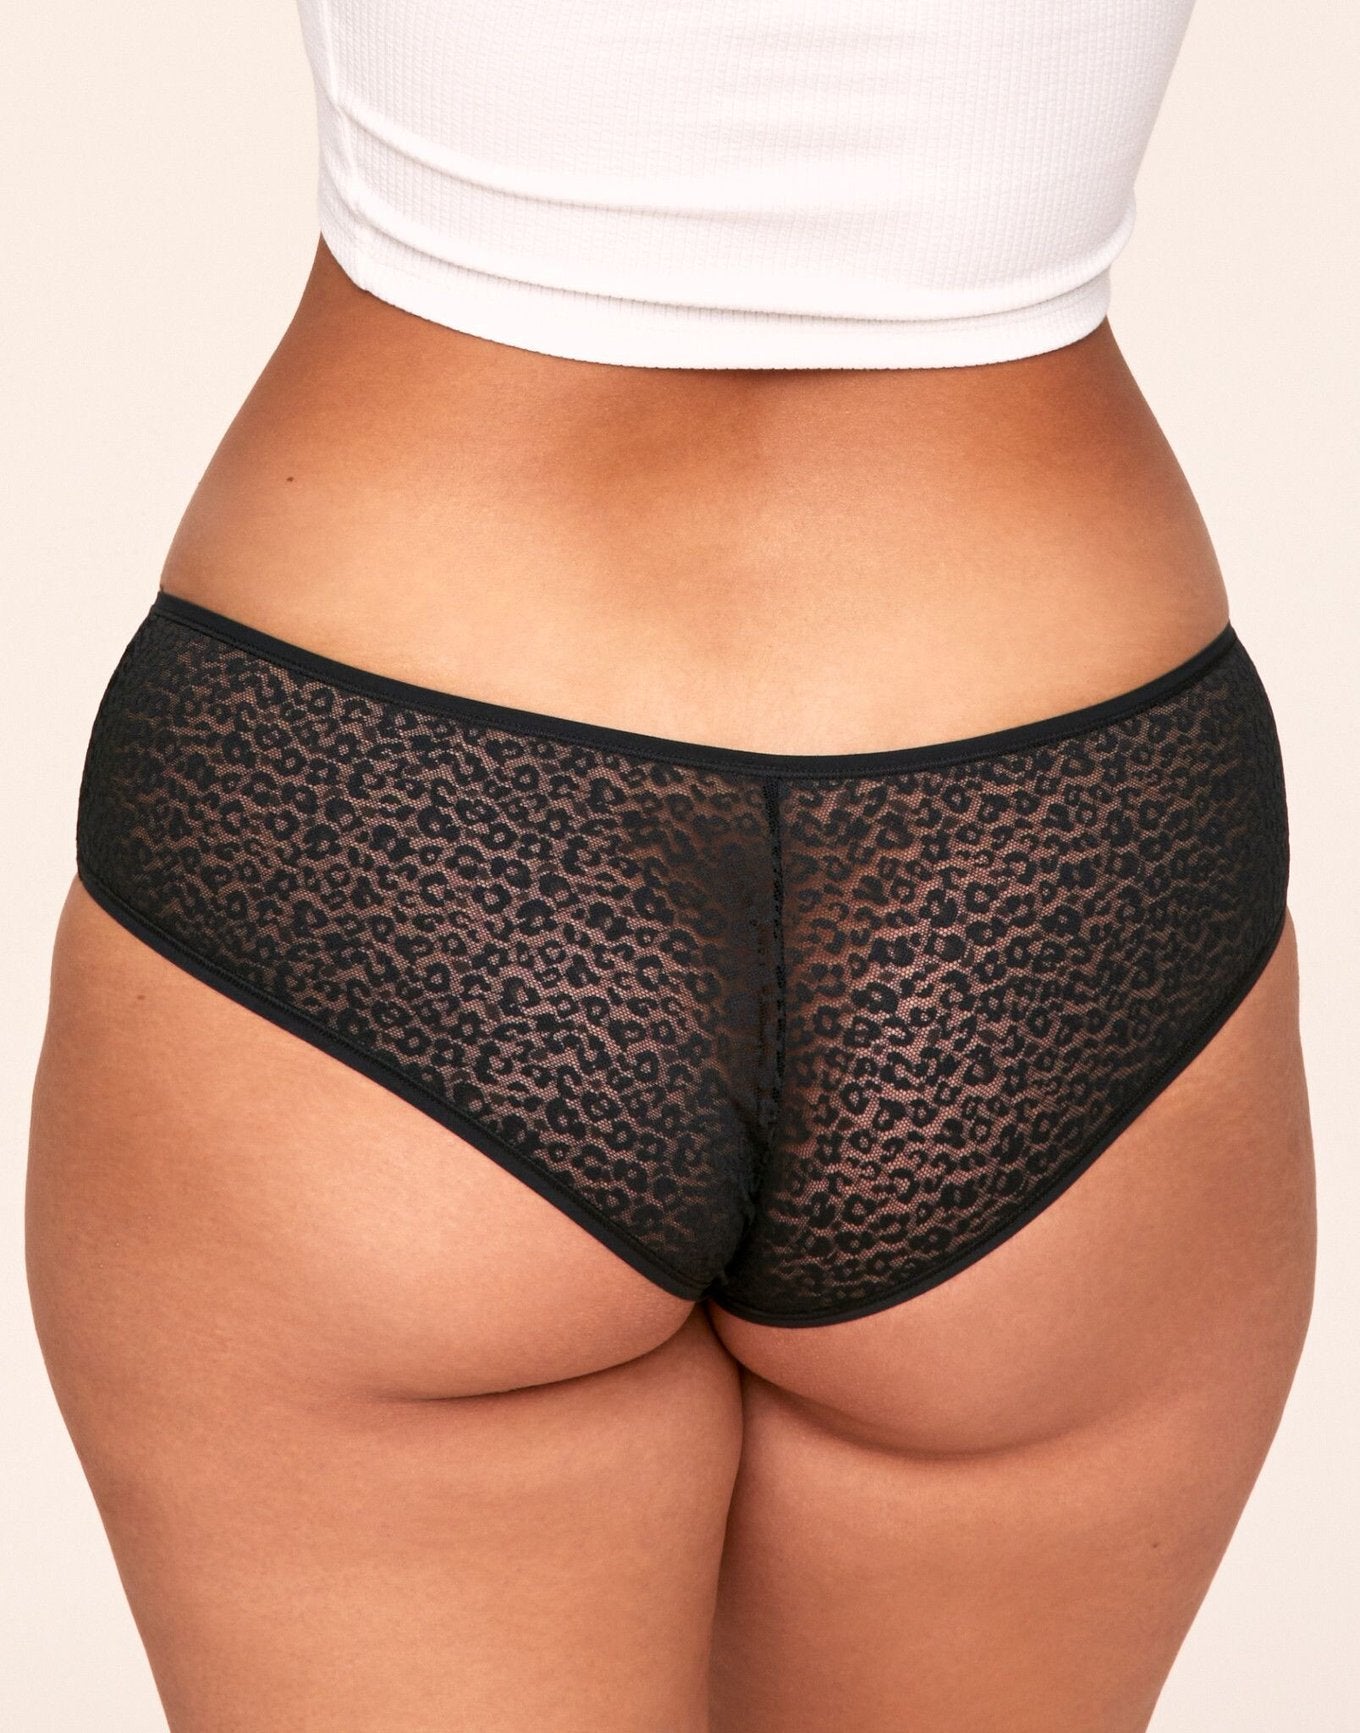 Earth Republic Billie Lace Lace Cheeky in color Jet Black and shape cheeky